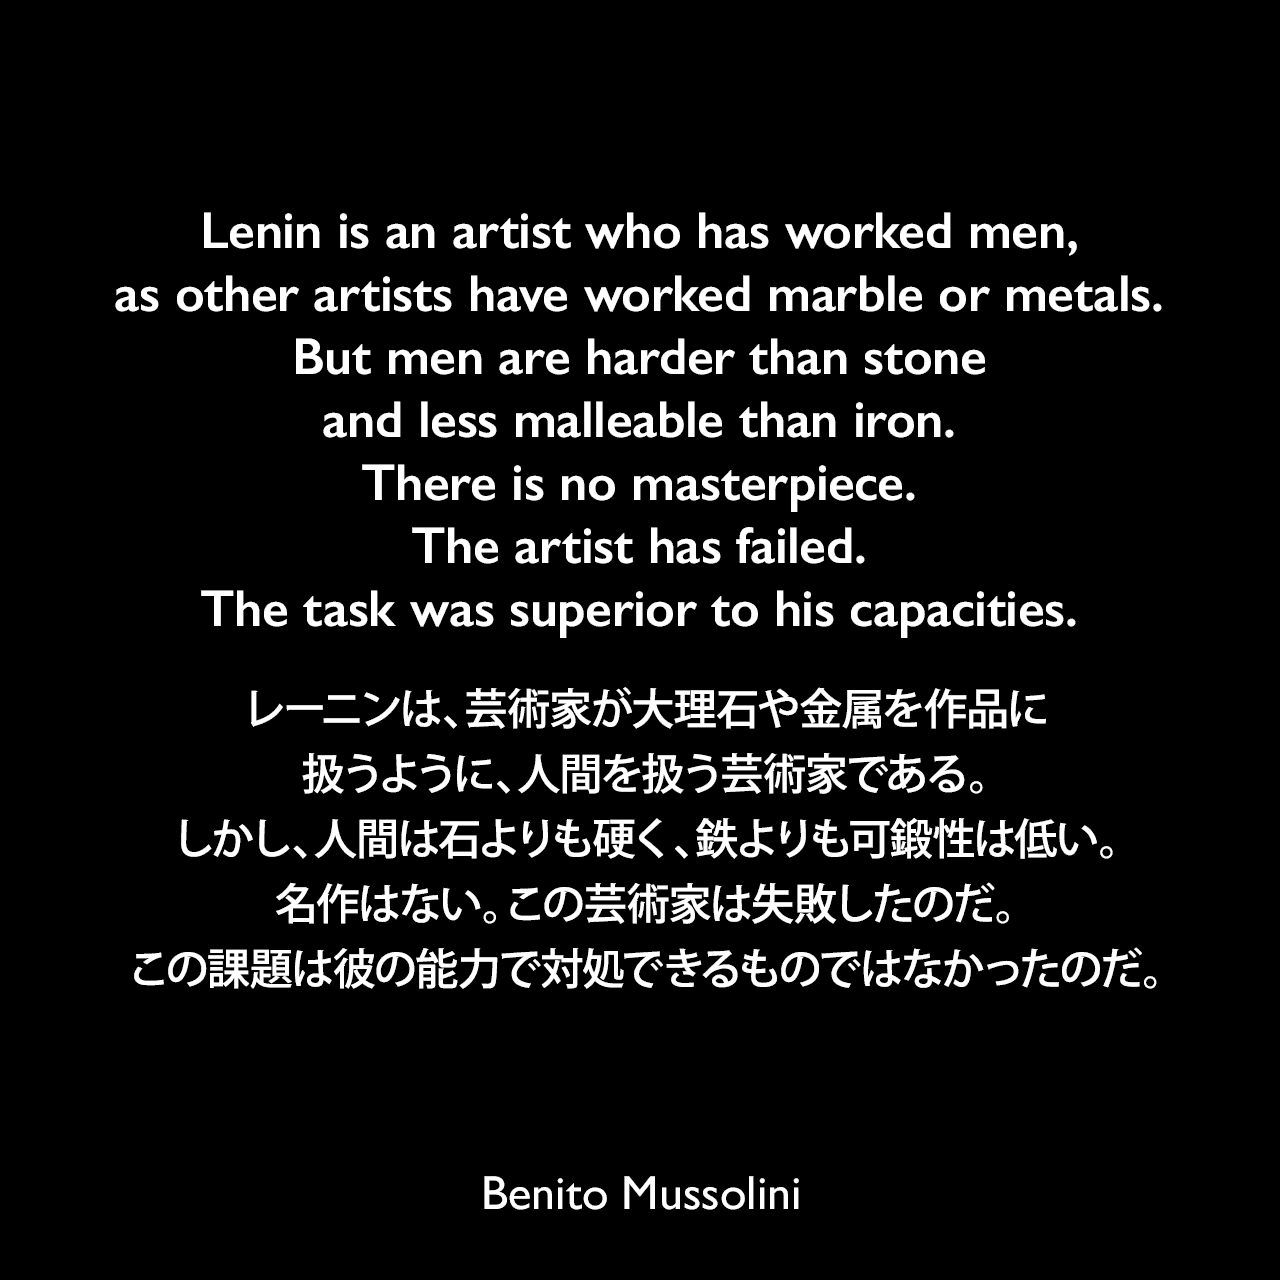 Lenin is an artist who has worked men, as other artists have worked marble or metals. But men are harder than stone and less malleable than iron. There is no masterpiece. The artist has failed. The task was superior to his capacities.レーニンは、芸術家が大理石や金属を作品に扱うように、人間を扱う芸術家である。しかし、人間は石よりも硬く、鉄よりも可鍛性は低い。名作はない。この芸術家は失敗したのだ。この課題は彼の能力で対処できるものではなかったのだ。- ムッソリーニが設立した新聞「ポポロ・ディタリア」（1920年7月14日）よりBenito Mussolini